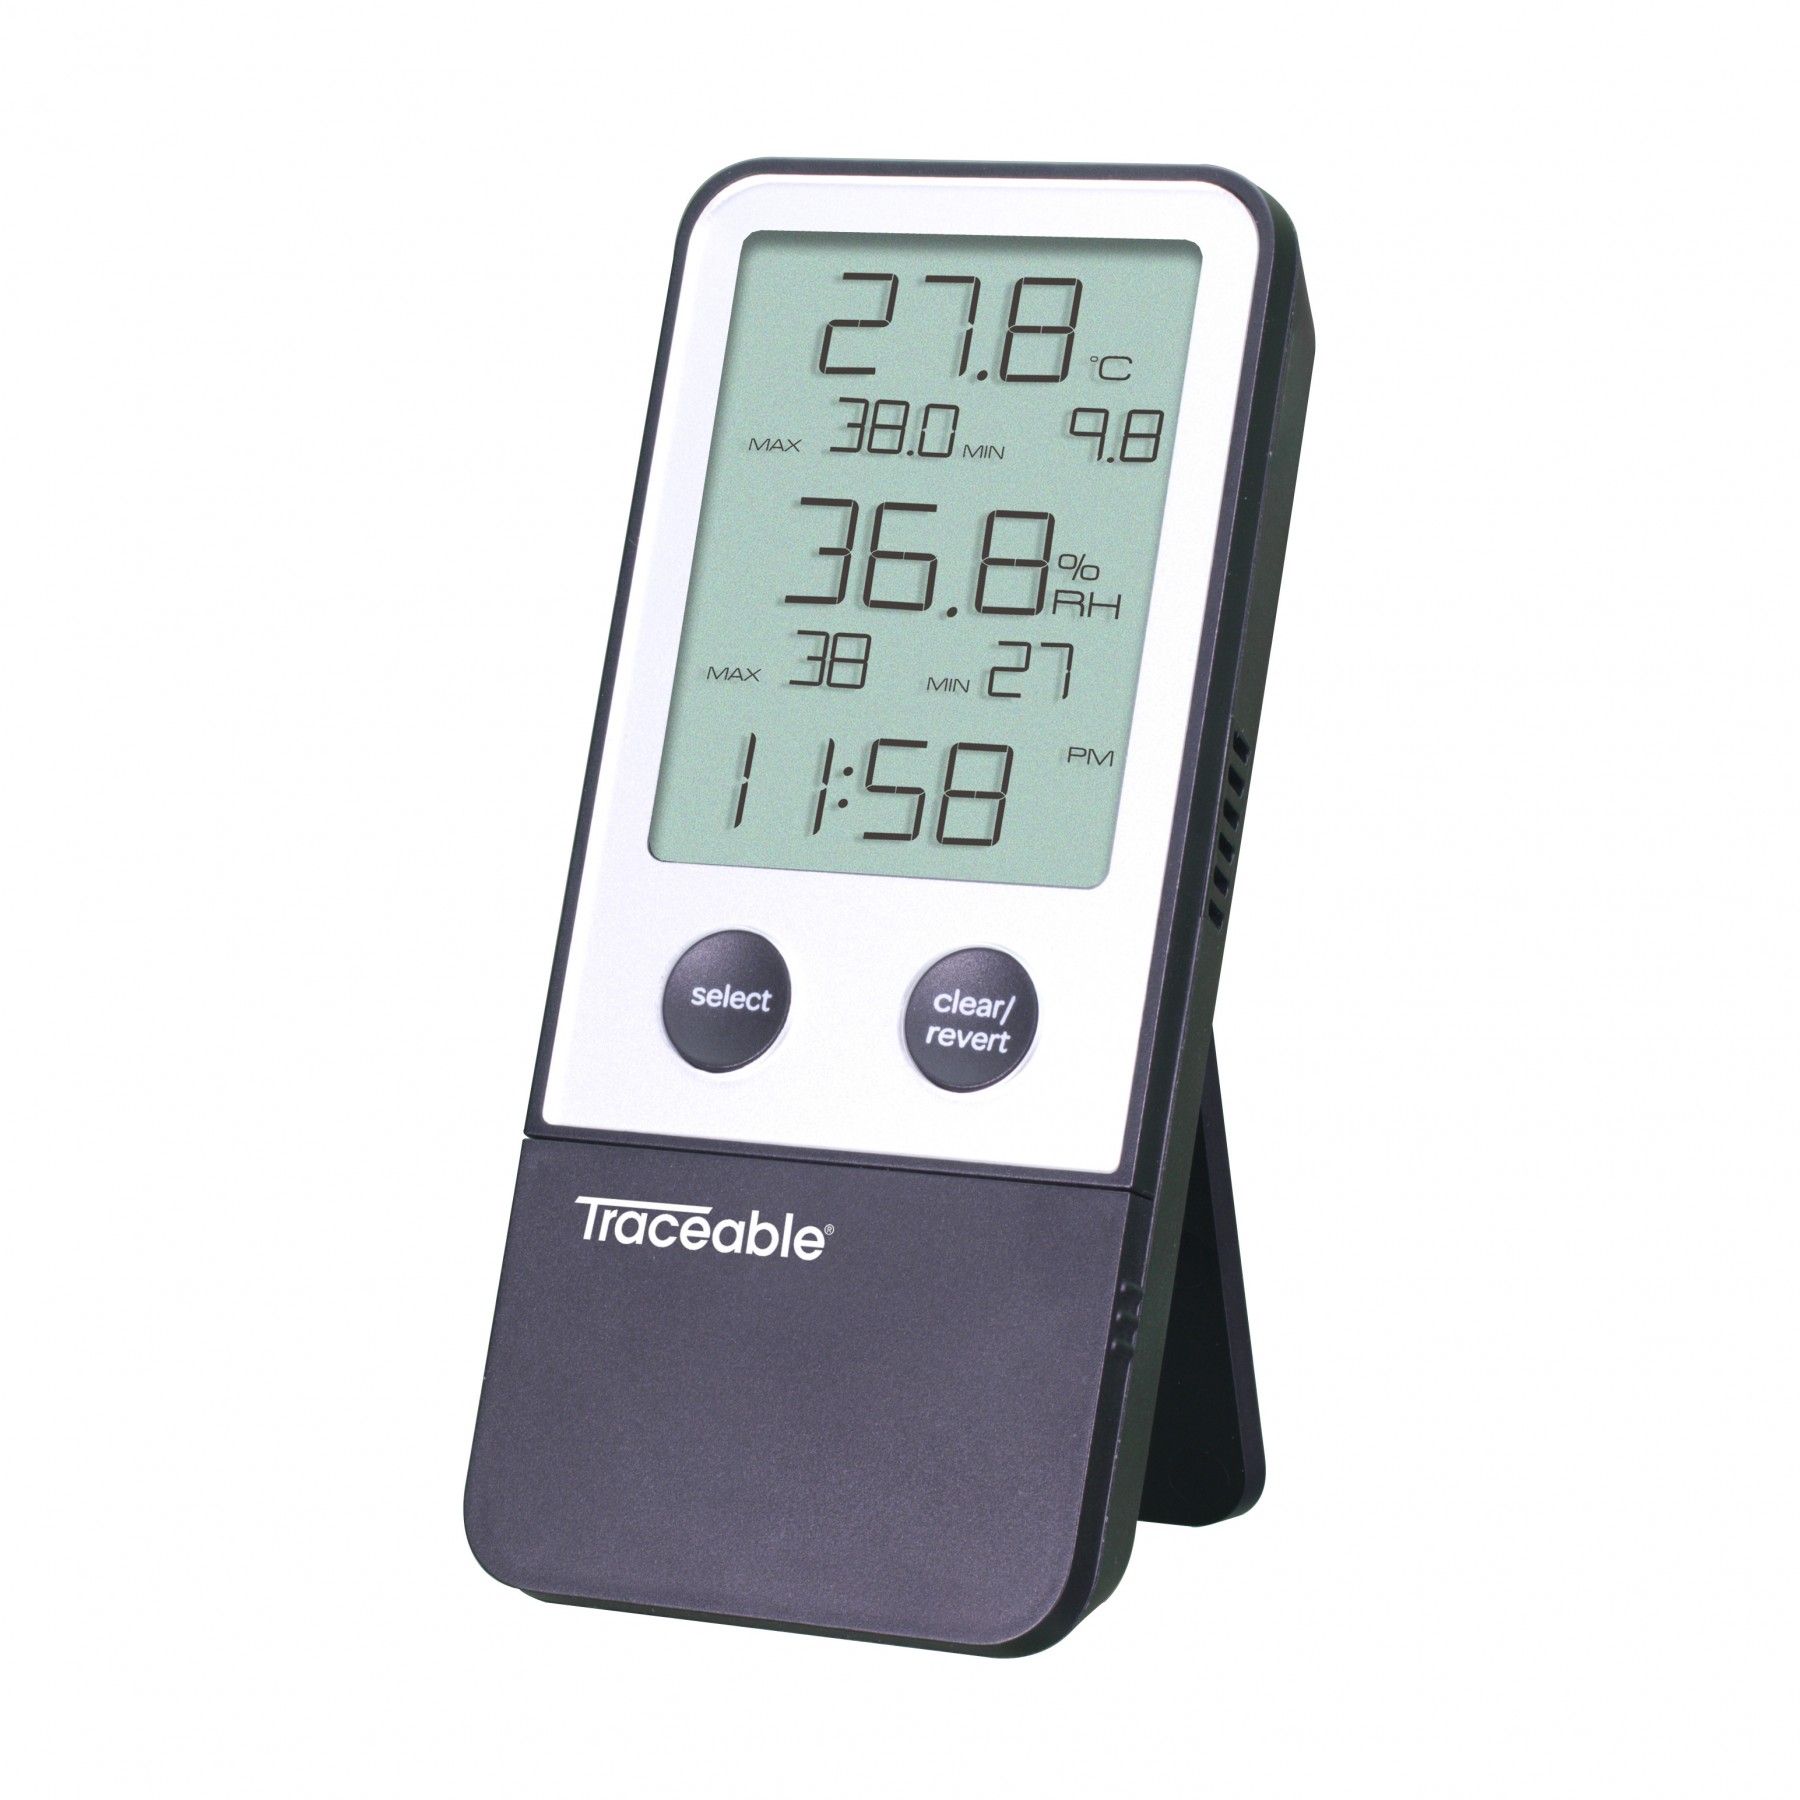 Lab Thermco ACC9216DIG Hygro Thermometer Hygrometer With Alarm